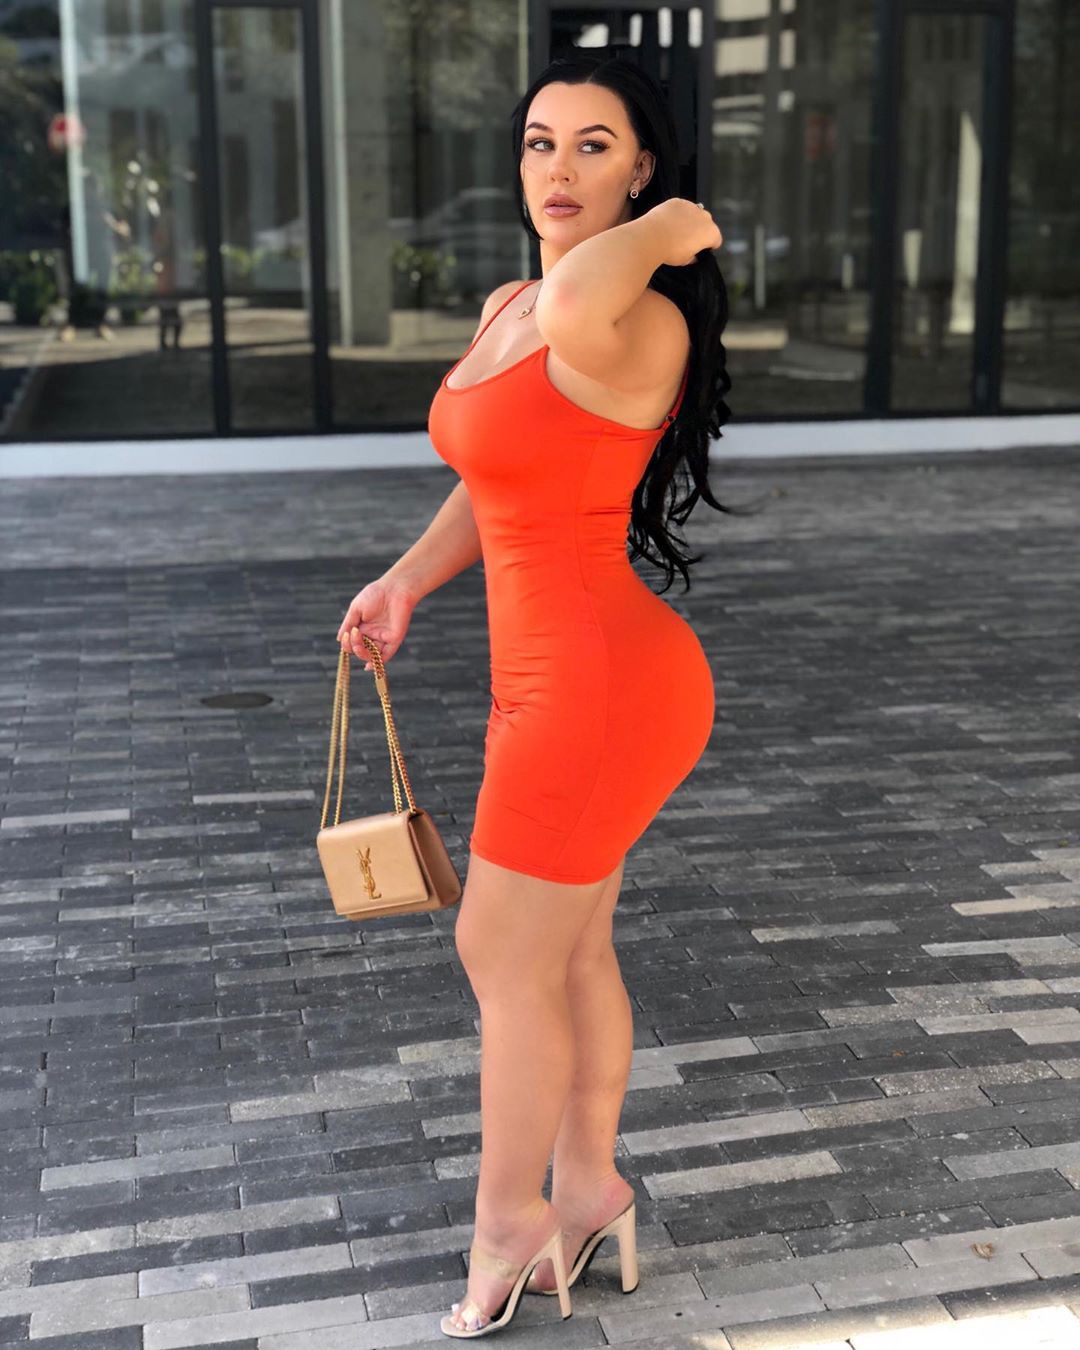 orange outfits for women with cocktail dress, legs picture: Cocktail Dresses,  Instagram girls,  Orange Dress,  Orange Cocktail Dress  